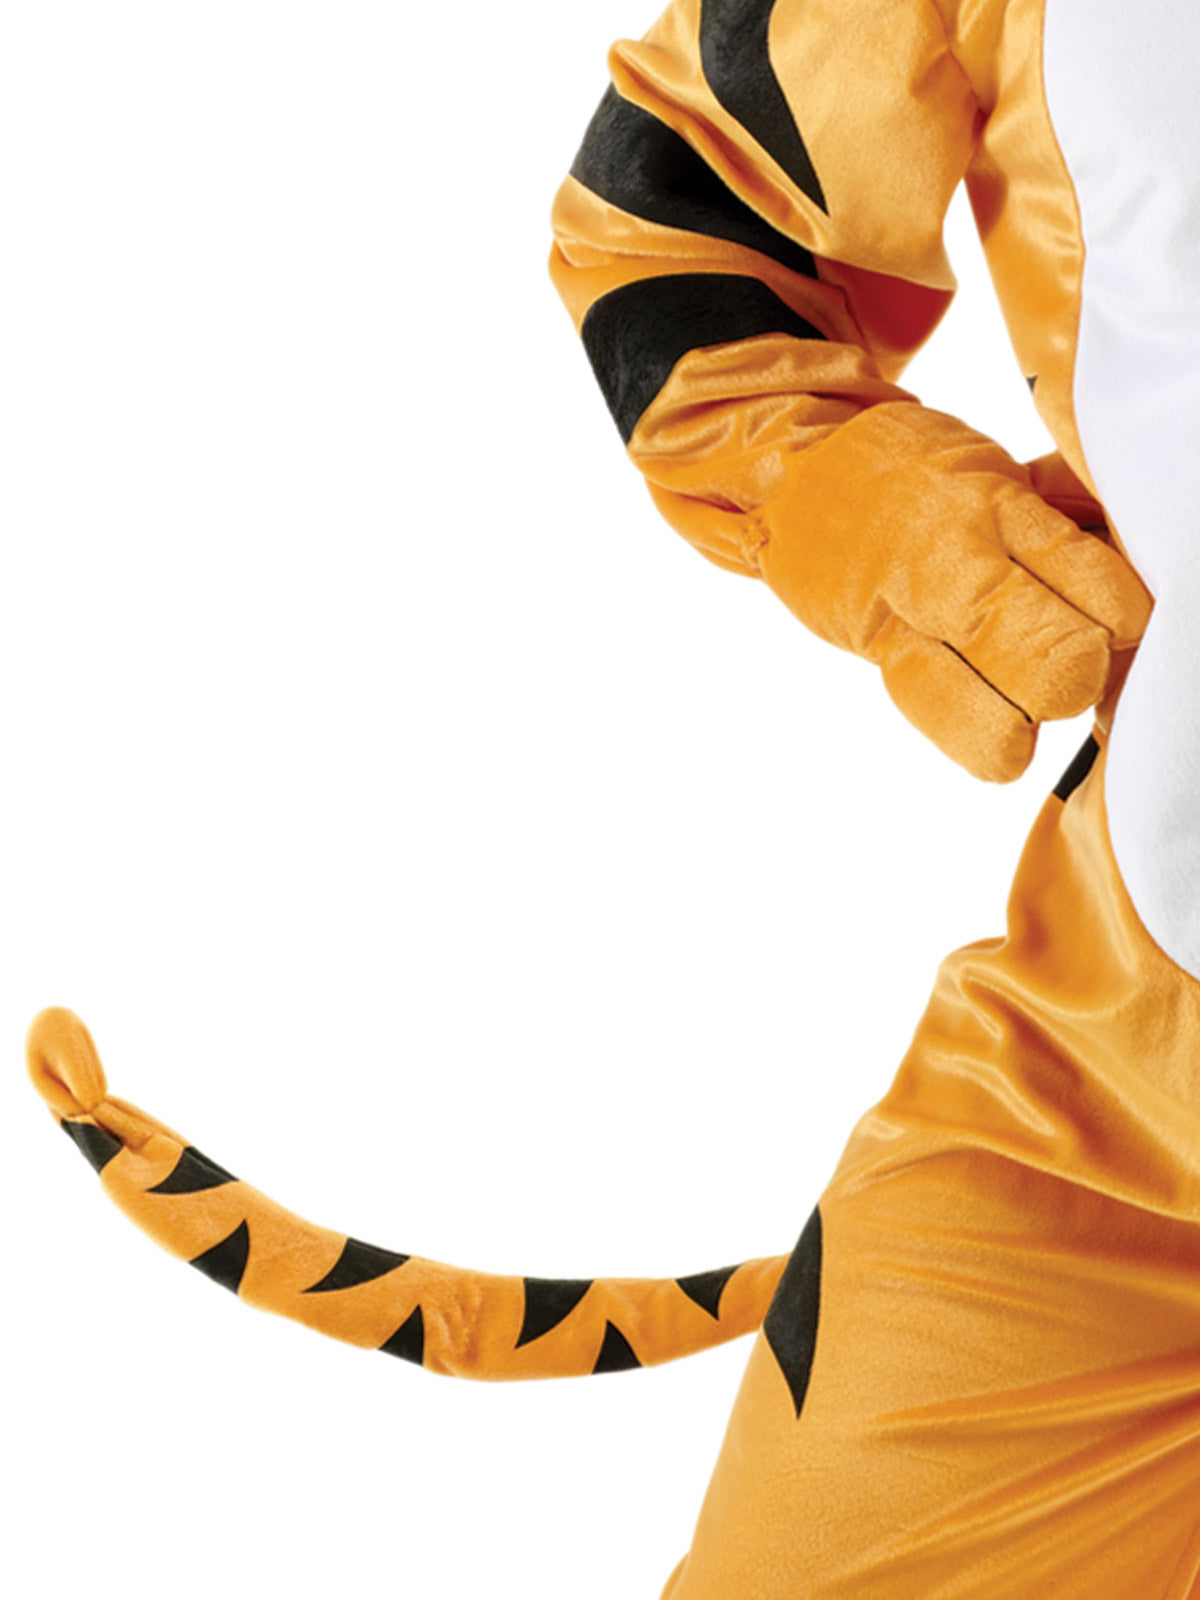 Tigger the tiger Deluxe Adult Plus Size Costume - Licensed